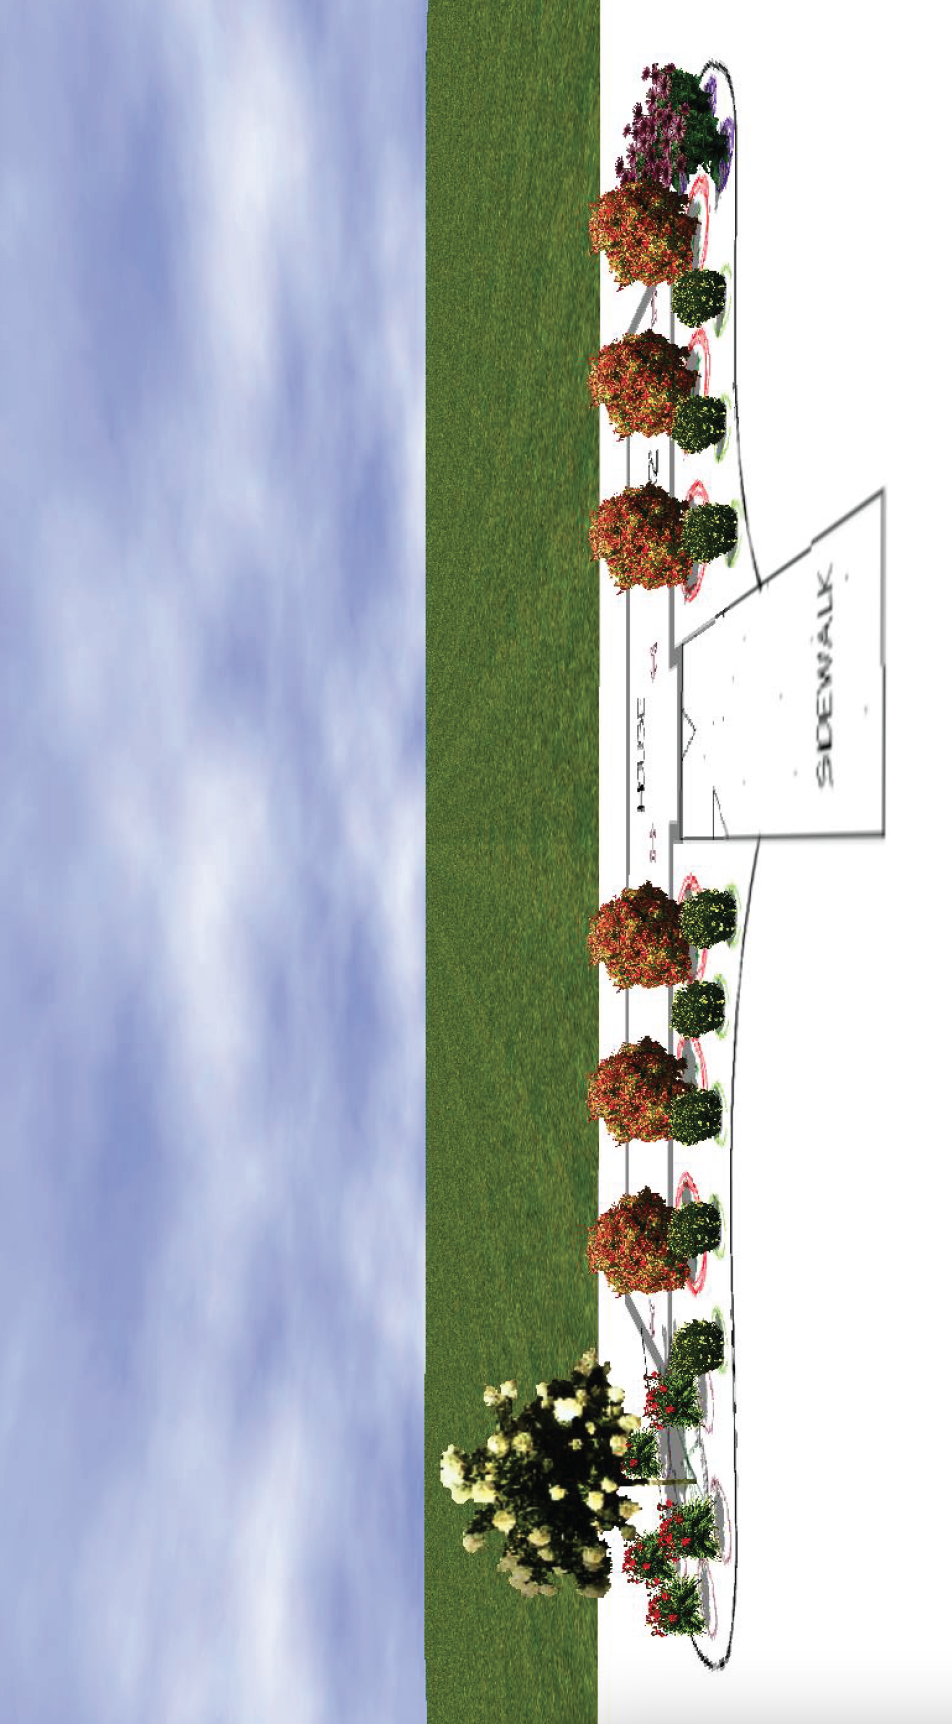 3D Model of a landscape plan for a front of house area.